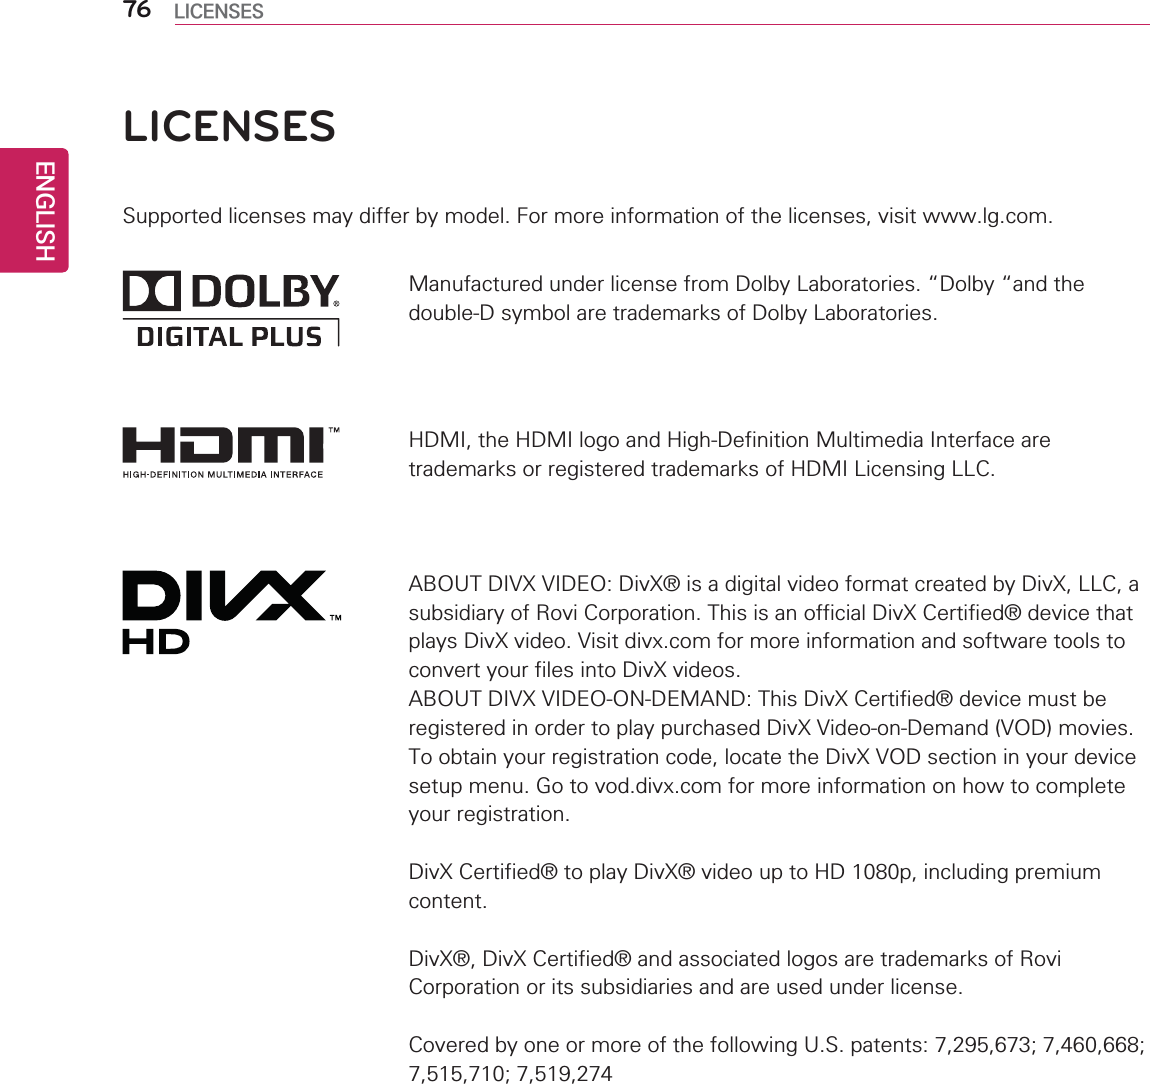 ENGLISH76 LICENSESLICENSESSupported licenses may differ by model. For more information of the licenses, visit www.lg.com.HDMI, the HDMI logo and High-Definition Multimedia Interface are trademarks or registered trademarks of HDMI Licensing LLC.ABOUT DIVX VIDEO: DivX® is a digital video format created by DivX, LLC, a subsidiary of Rovi Corporation. This is an official DivX Certified® device that plays DivX video. Visit divx.com for more information and software tools to convert your files into DivX videos.ABOUT DIVX VIDEO-ON-DEMAND: This DivX Certified® device must be registered in order to play purchased DivX Video-on-Demand (VOD) movies. To obtain your registration code, locate the DivX VOD section in your device setup menu. Go to vod.divx.com for more information on how to complete your registration.DivX Certified® to play DivX® video up to HD 1080p, including premium content.DivX®, DivX Certified® and associated logos are trademarks of Rovi Corporation or its subsidiaries and are used under license.Covered by one or more of the following U.S. patents: 7,295,673; 7,460,668; 7,515,710; 7,519,274Manufactured under license from Dolby Laboratories. “Dolby “and the double-D symbol are trademarks of Dolby Laboratories.